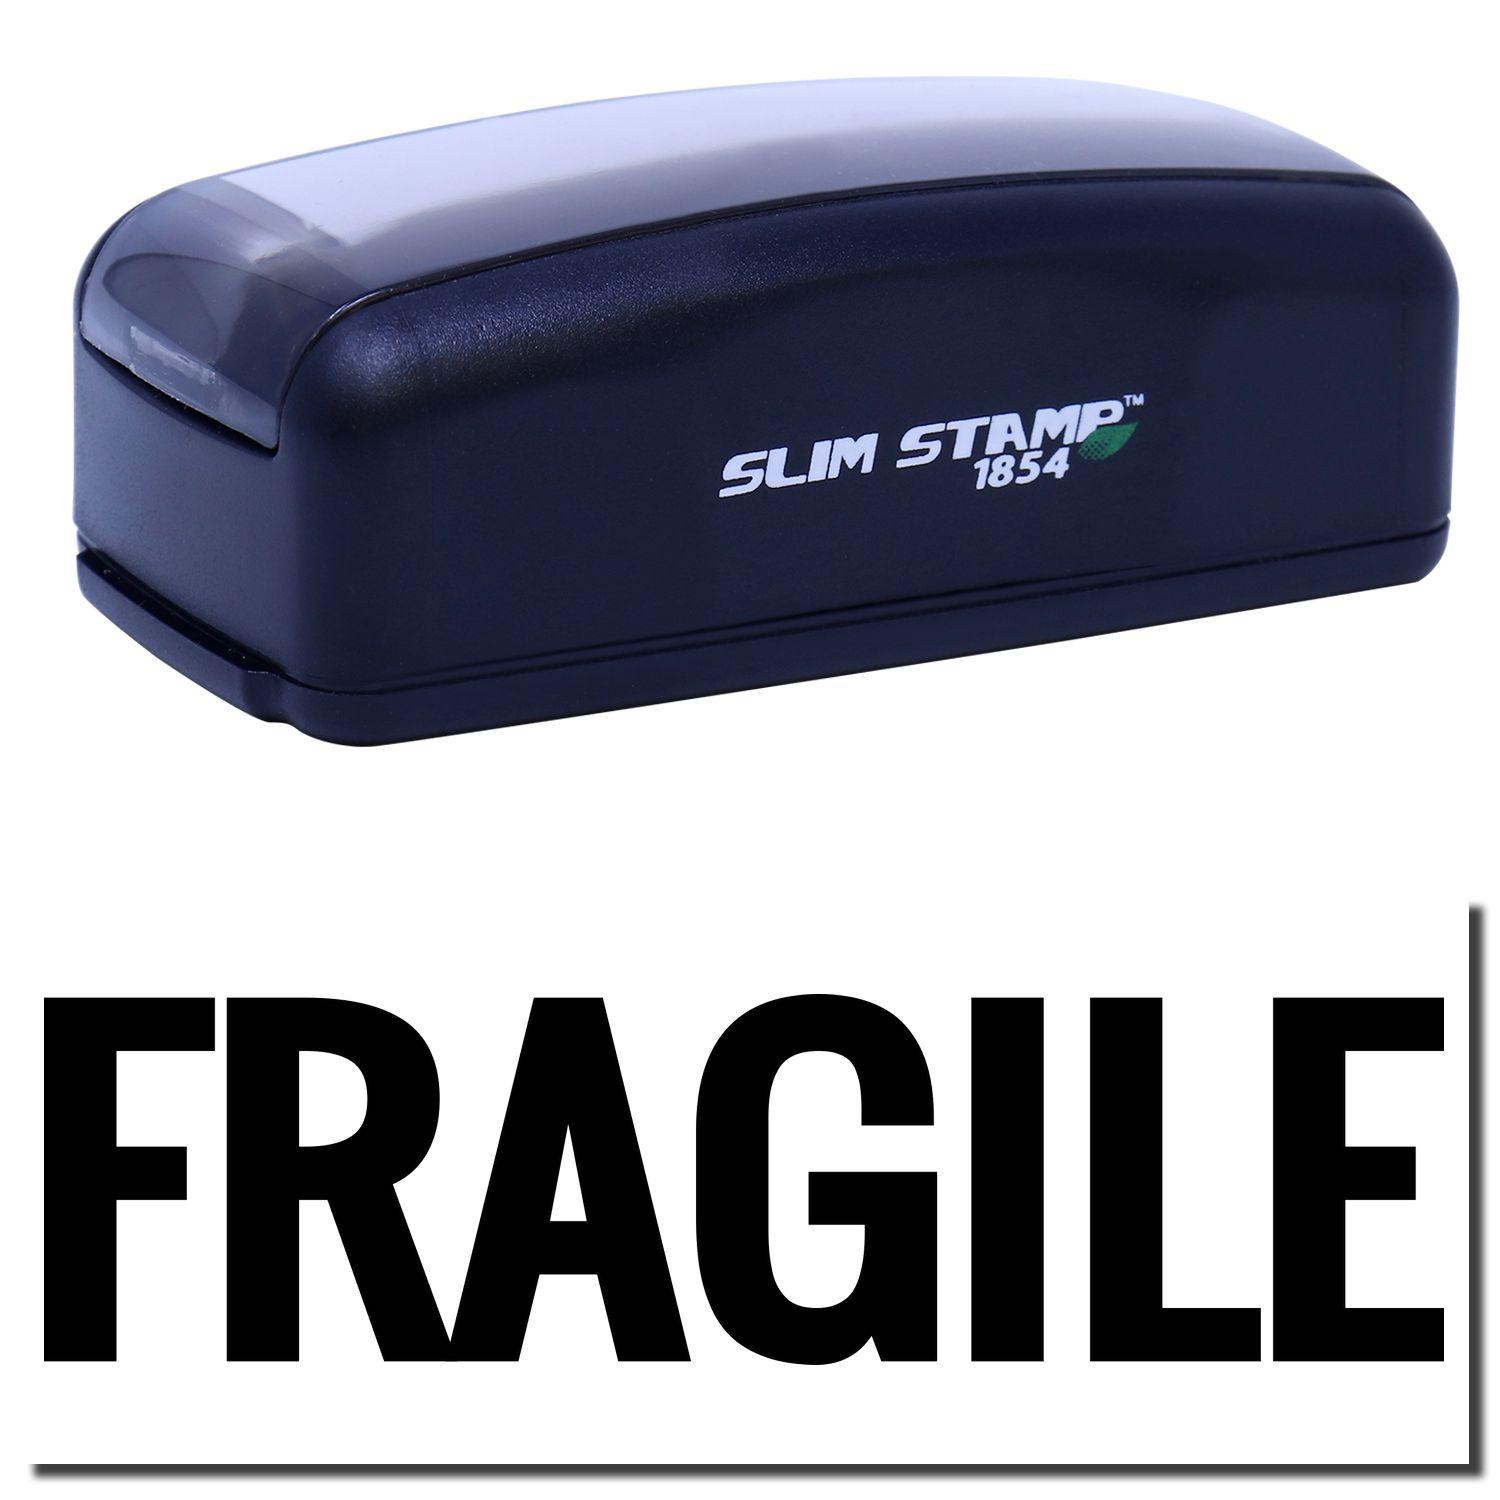 A slim pre-inked stamp with a stamped image showing how the text "FRAGILE" in large bold font is displayed after stamping.